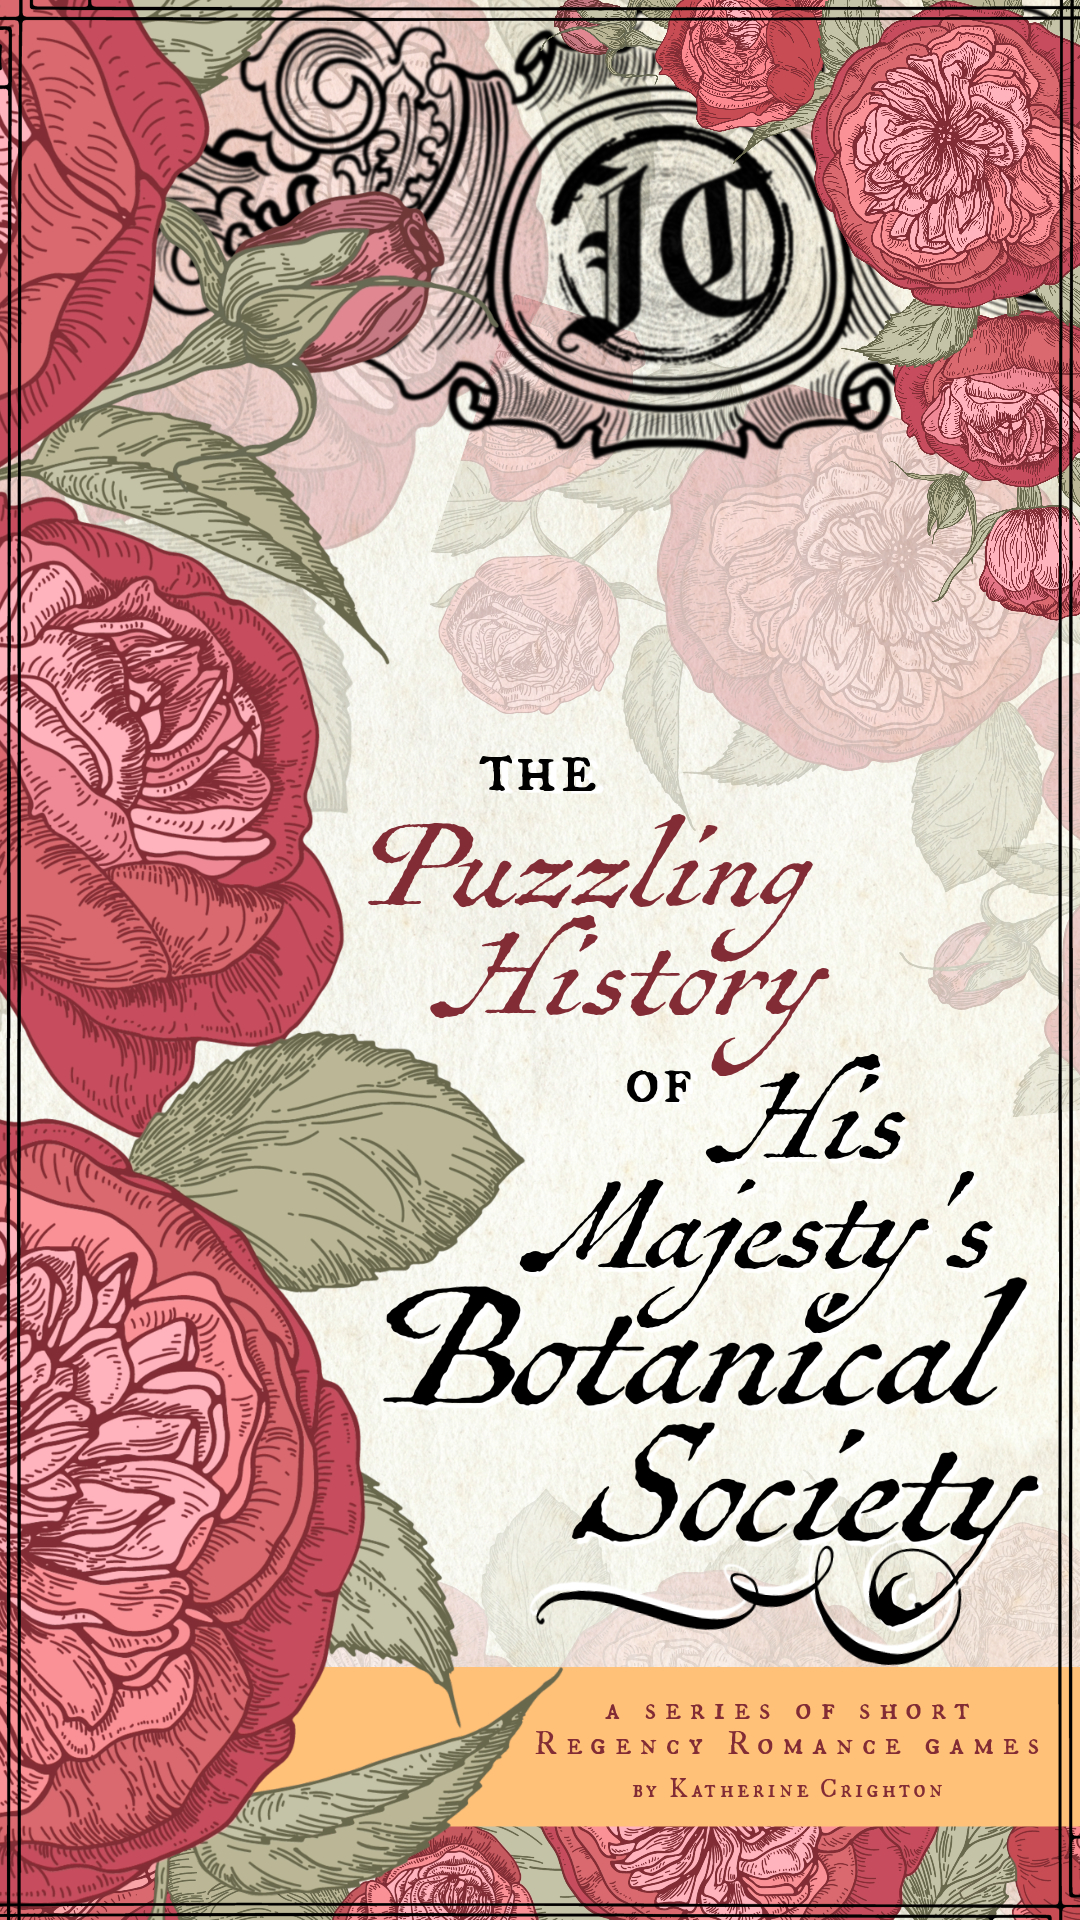 The Puzzling History of His Majesty's Botanical Society: a series of short Regency Romance games by Katherine Crighton